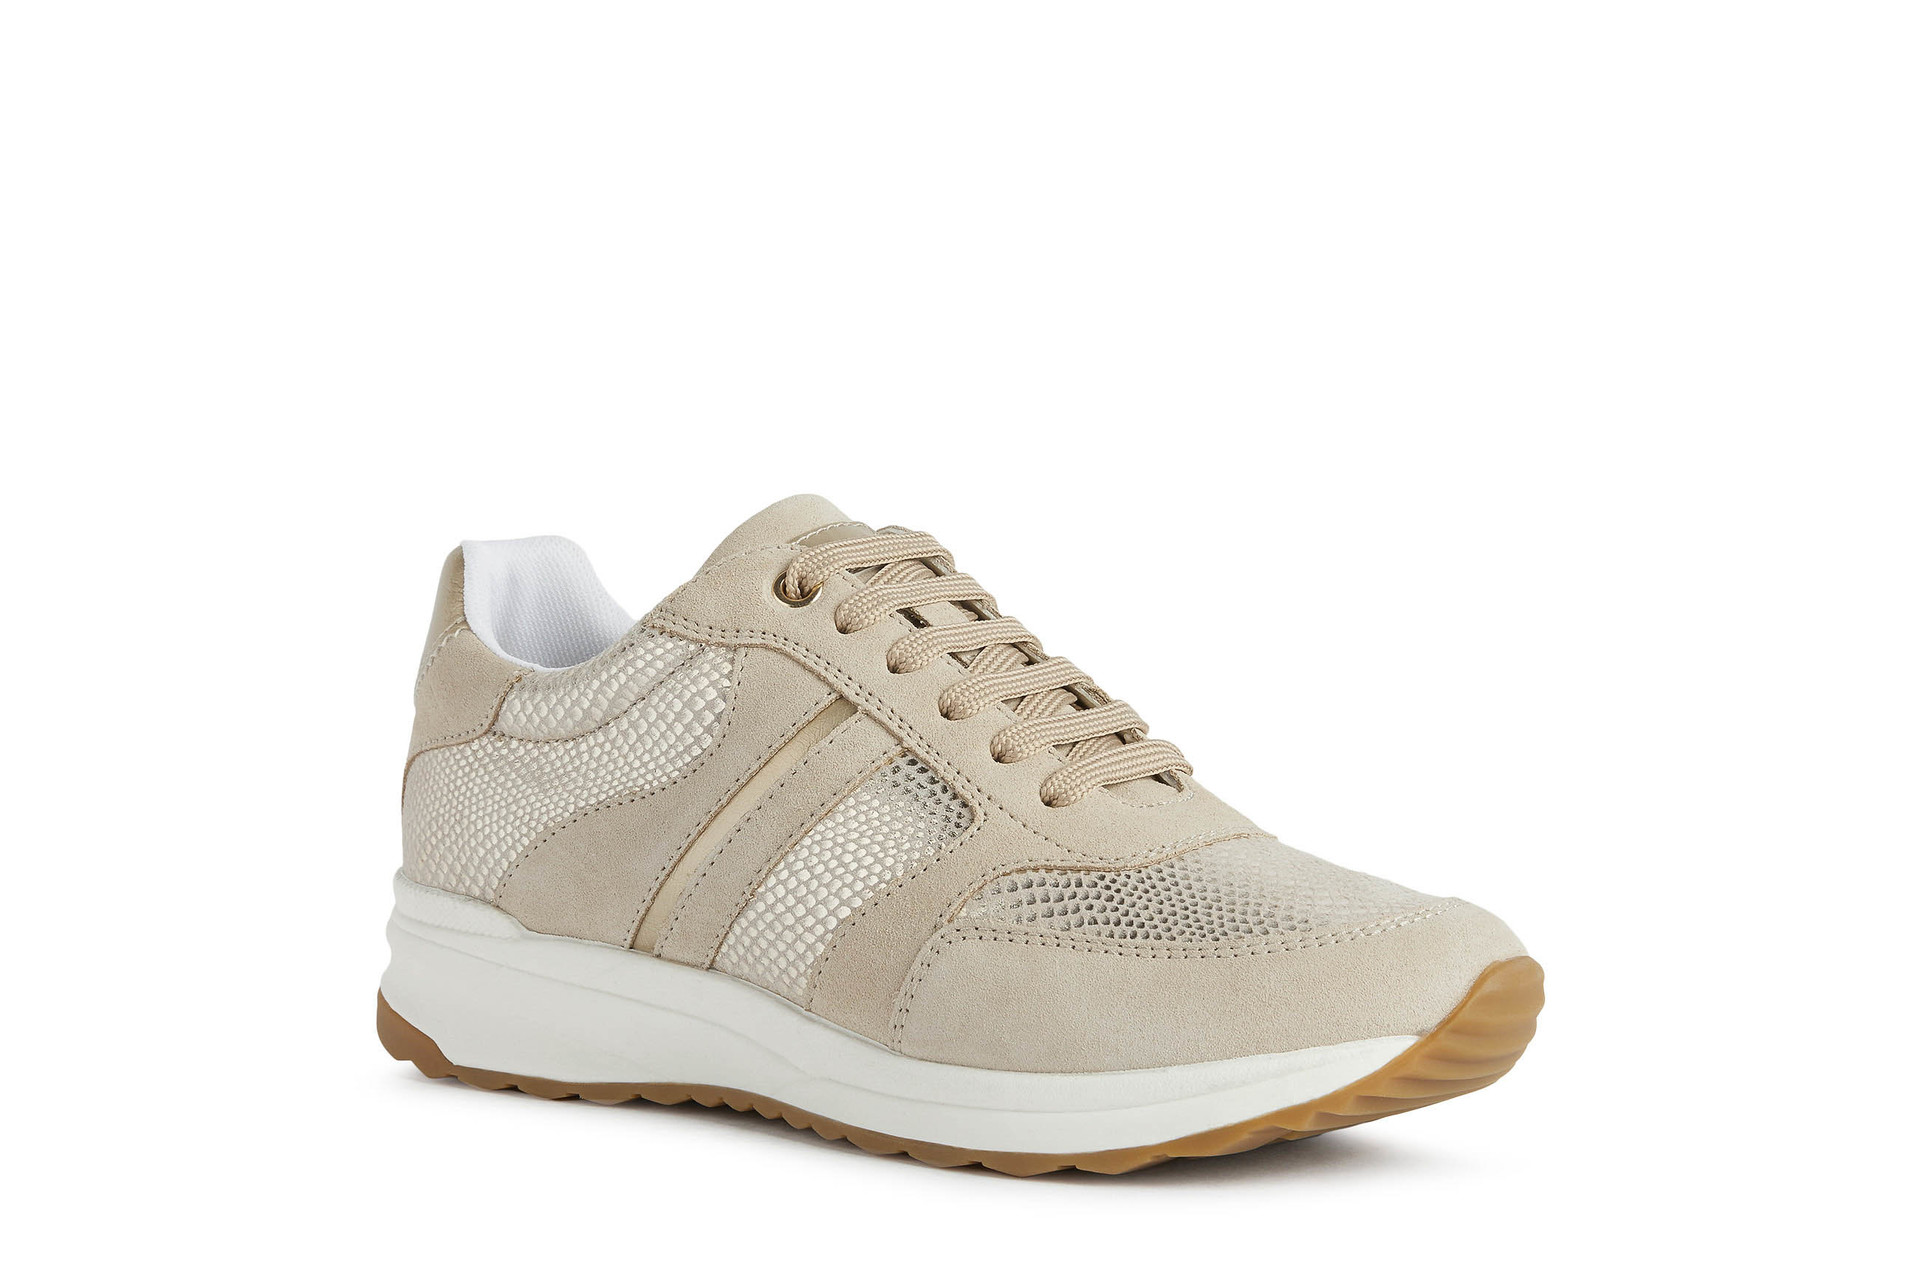 GEOX Airell - Beige suede leather